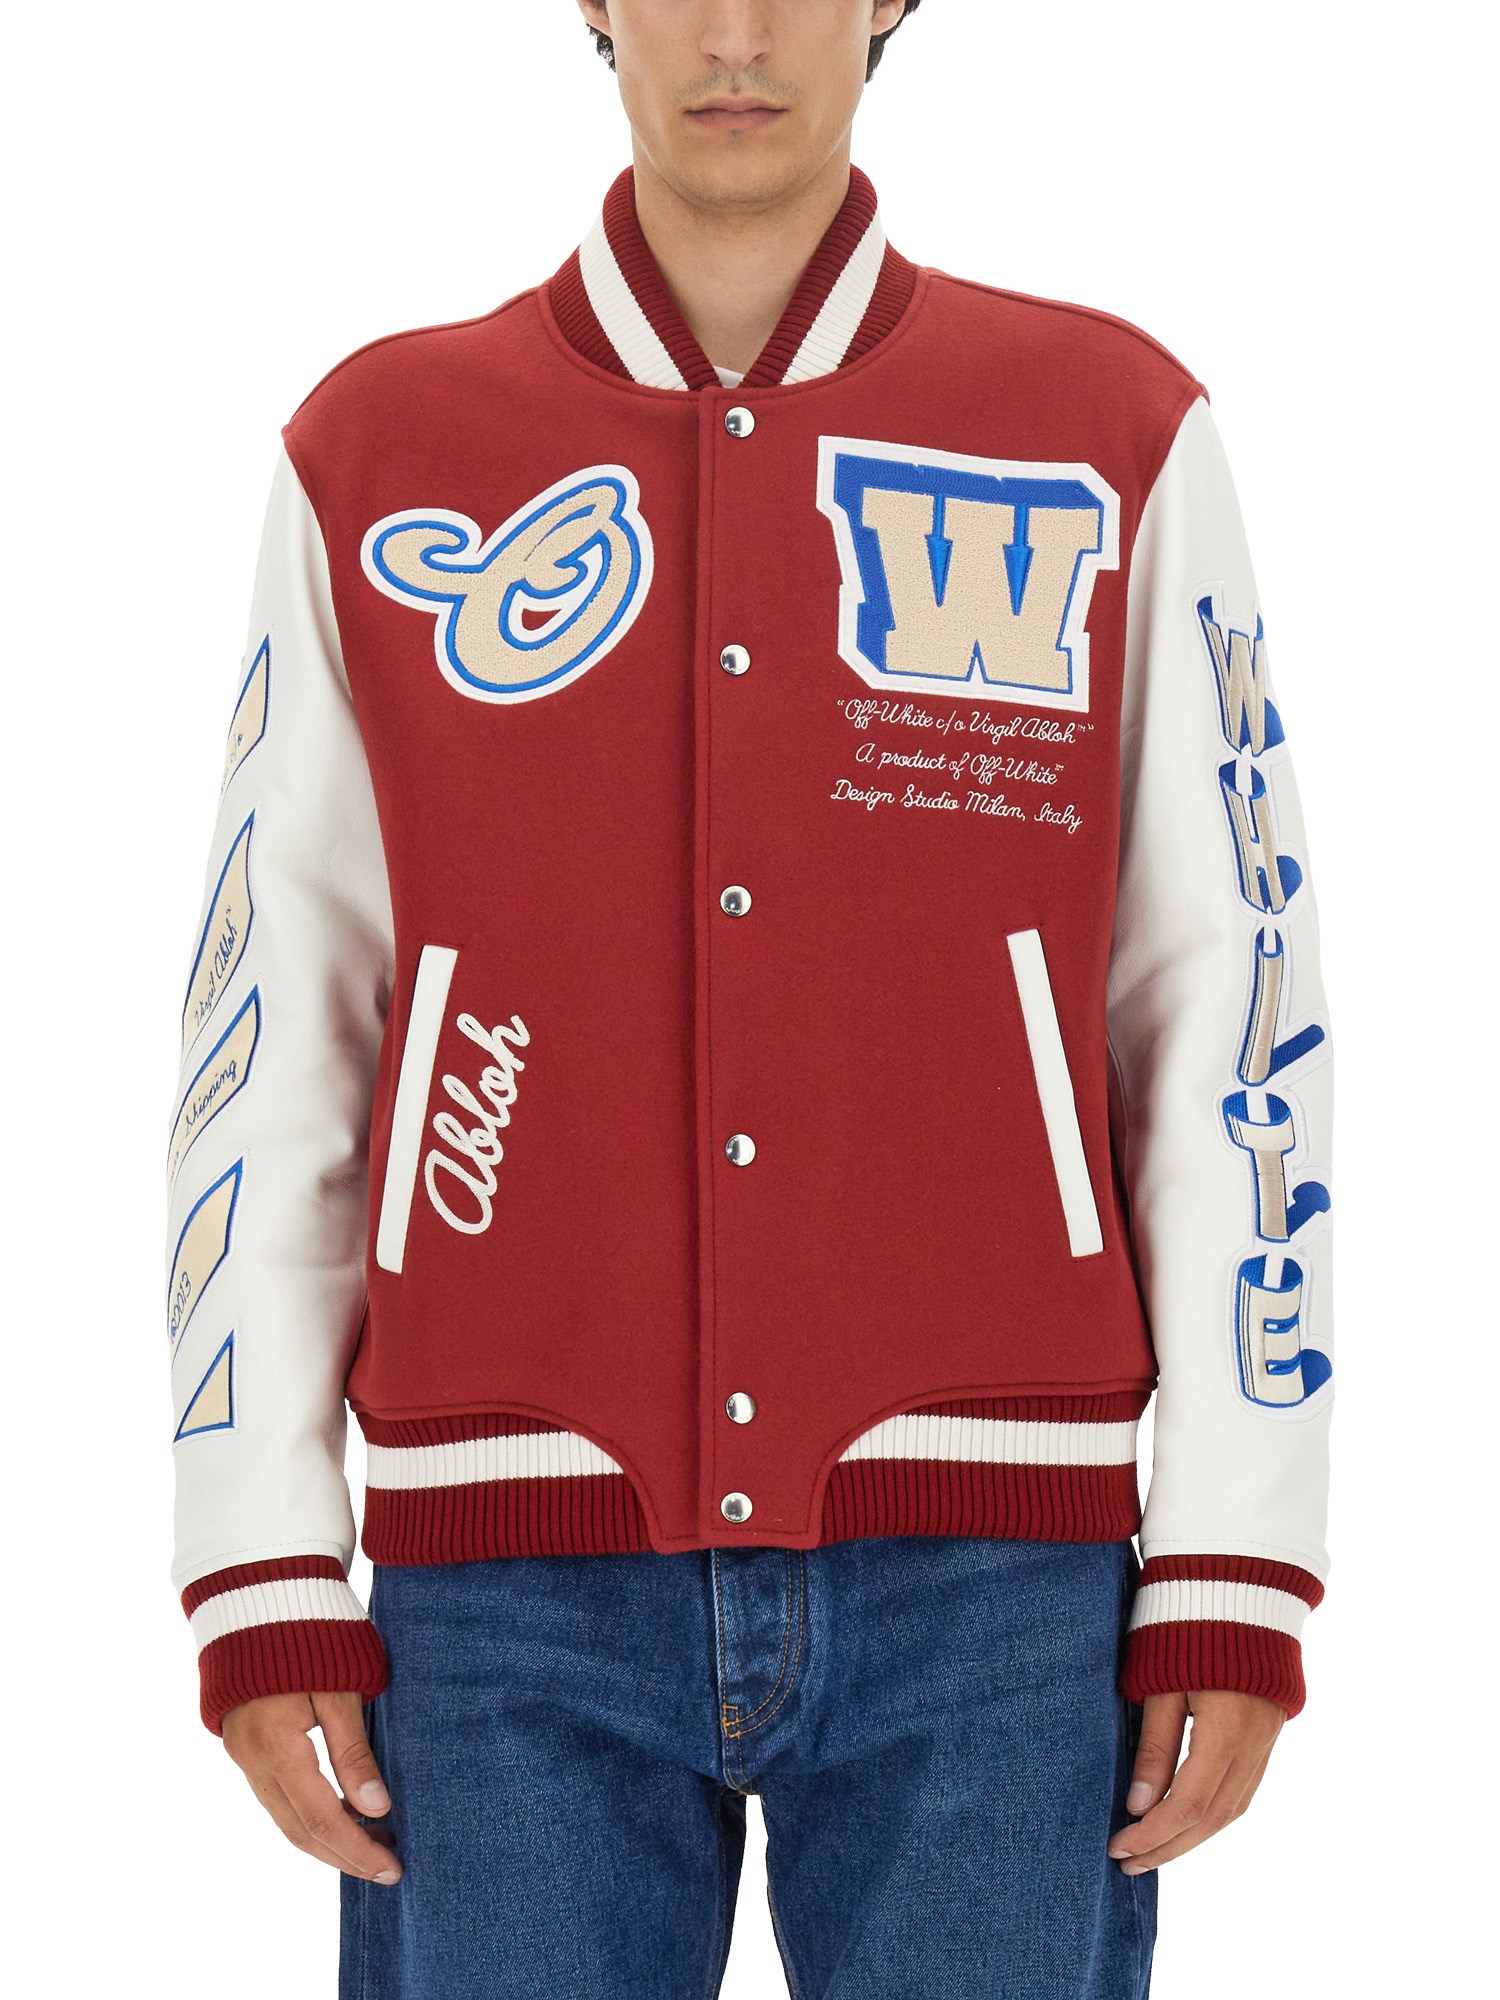 off-white bomber jacket with appliqué